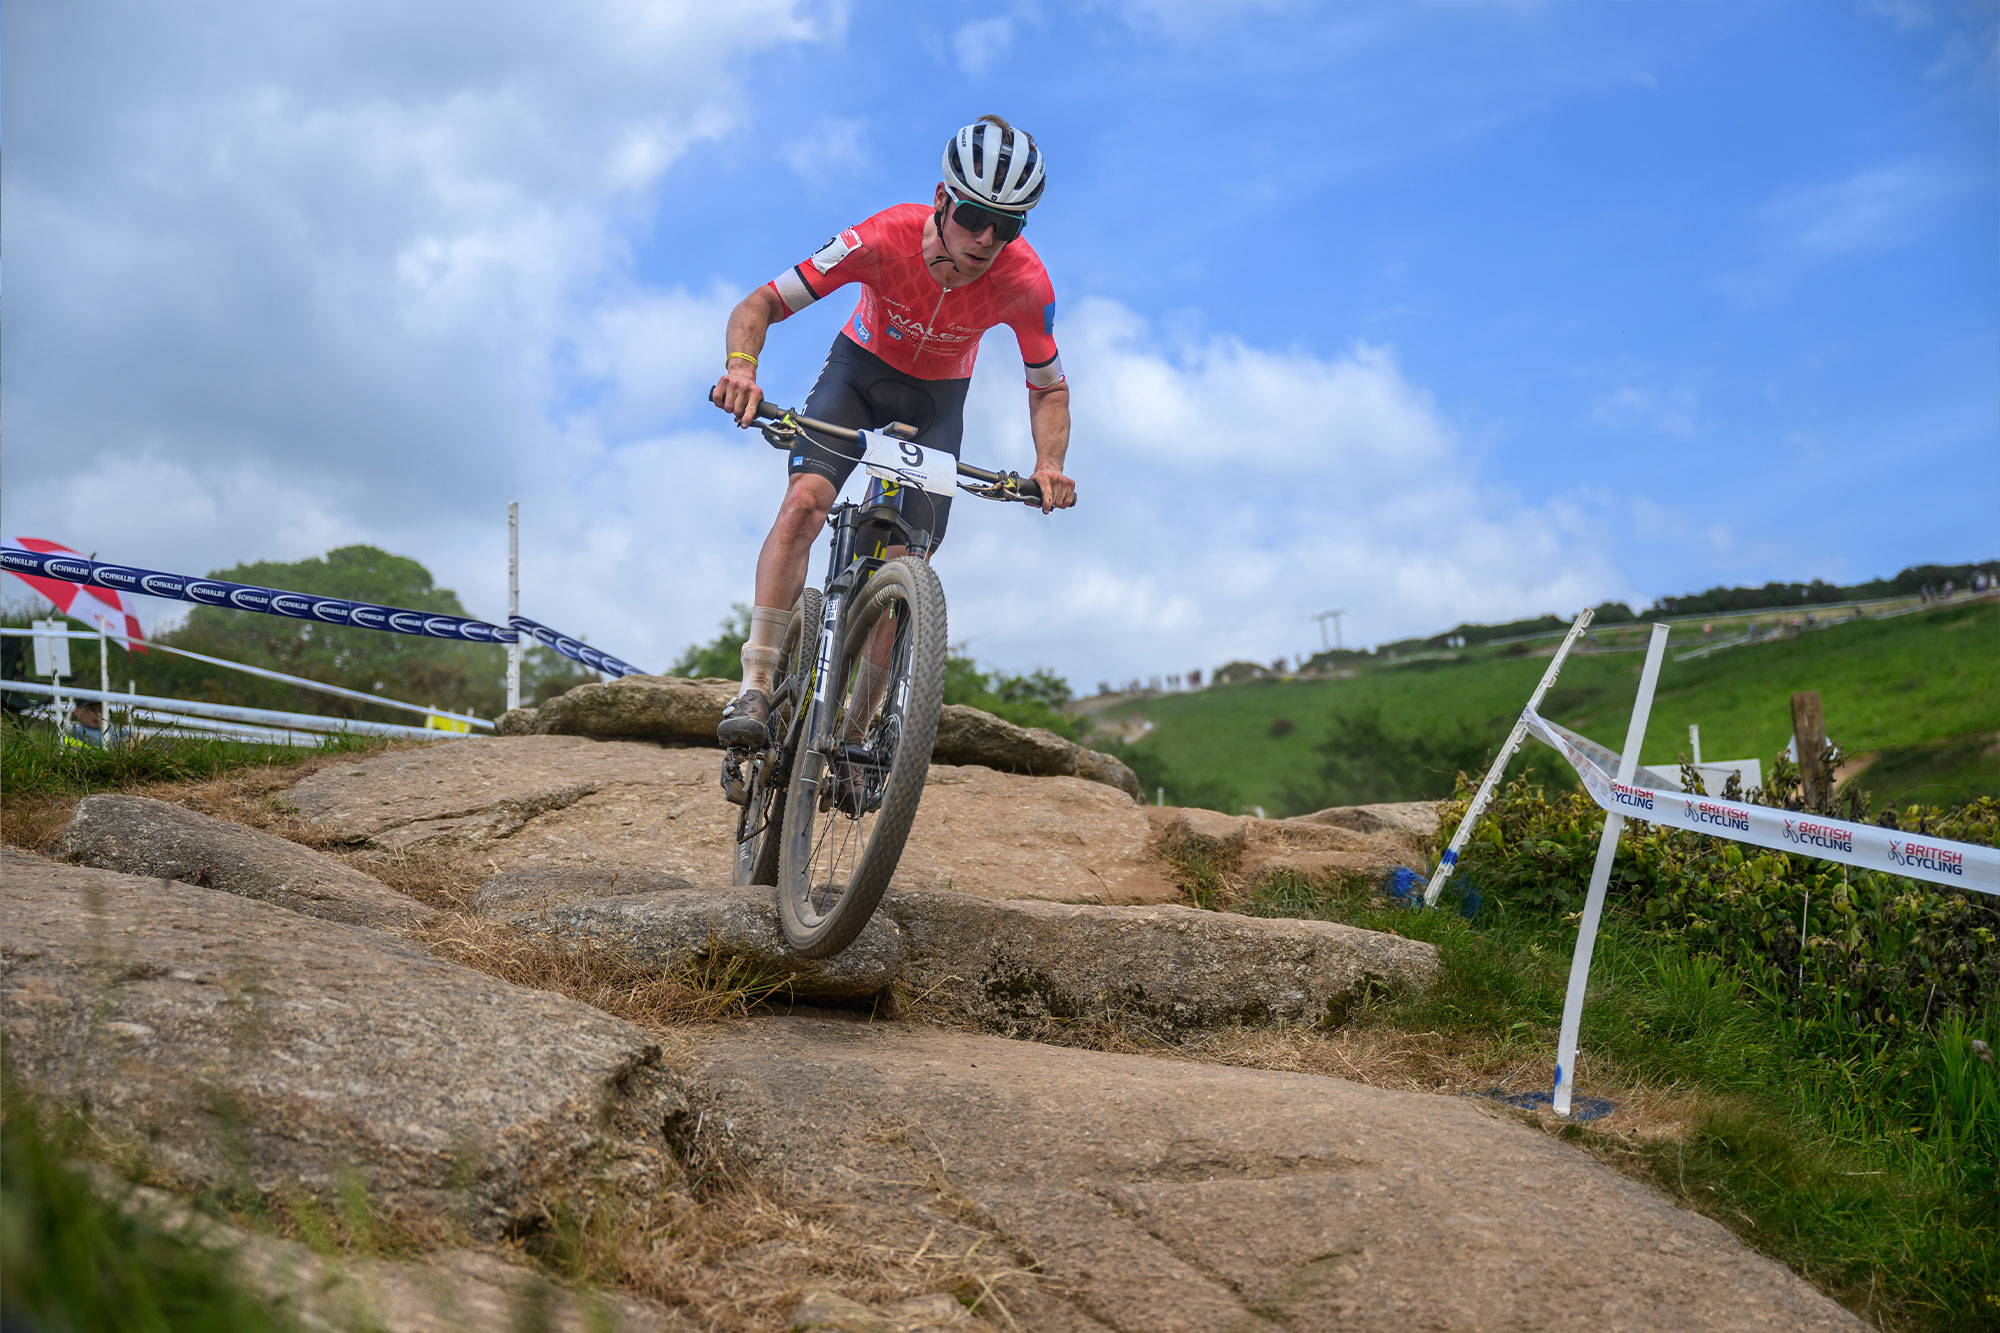 Huw riding rocky section at XC race